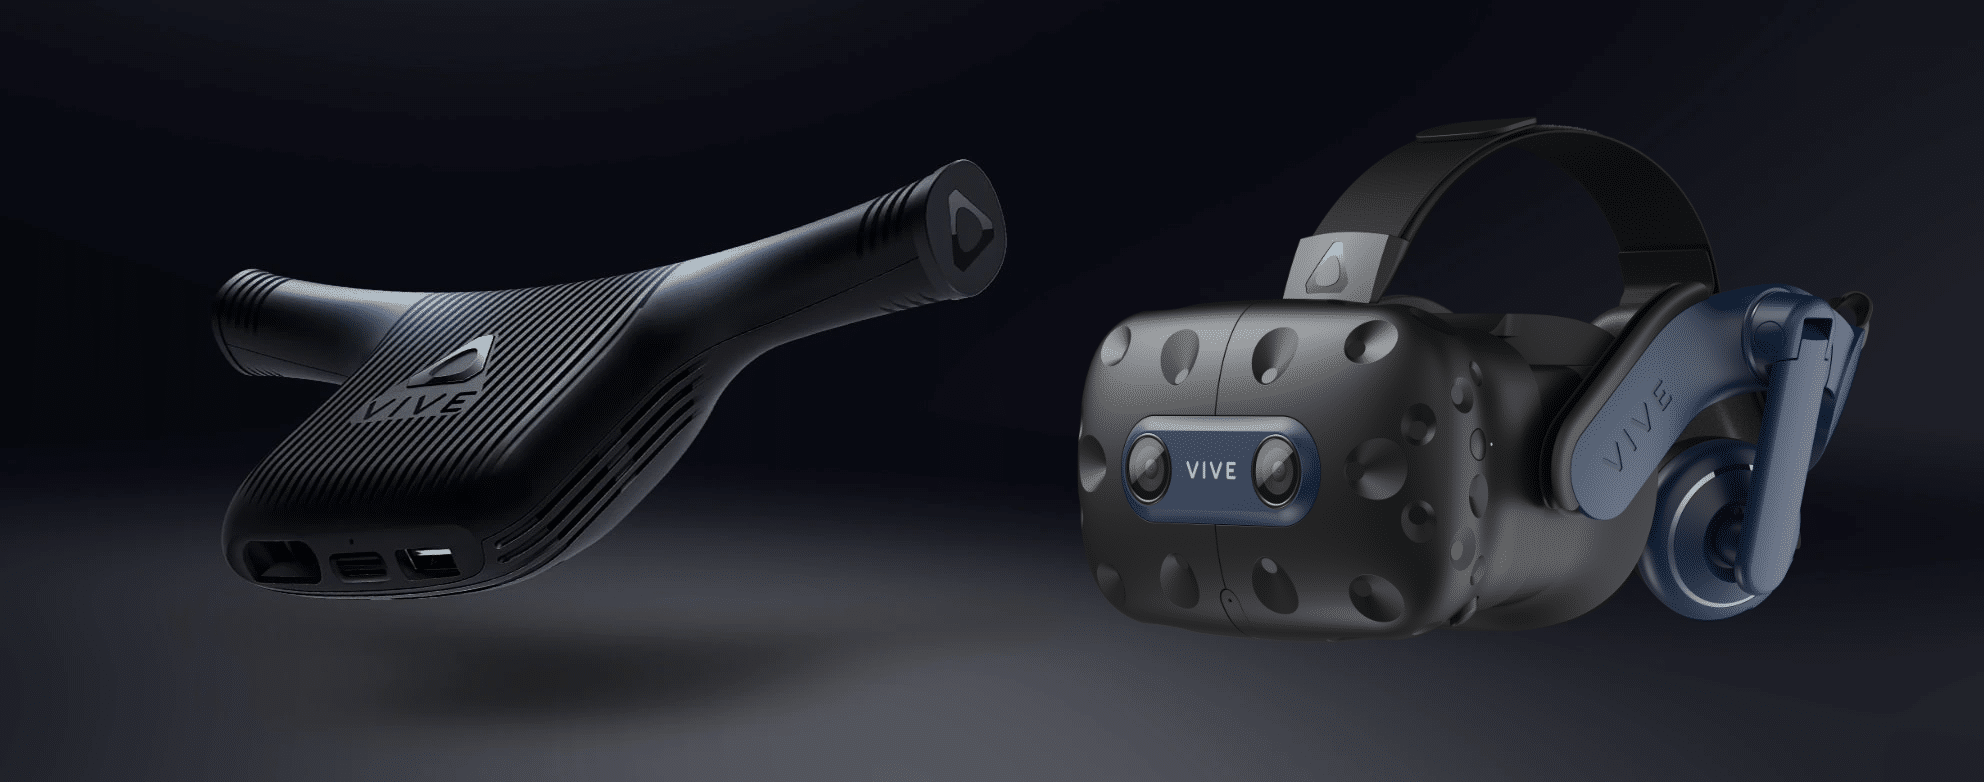 VIVE Wireless Dongle